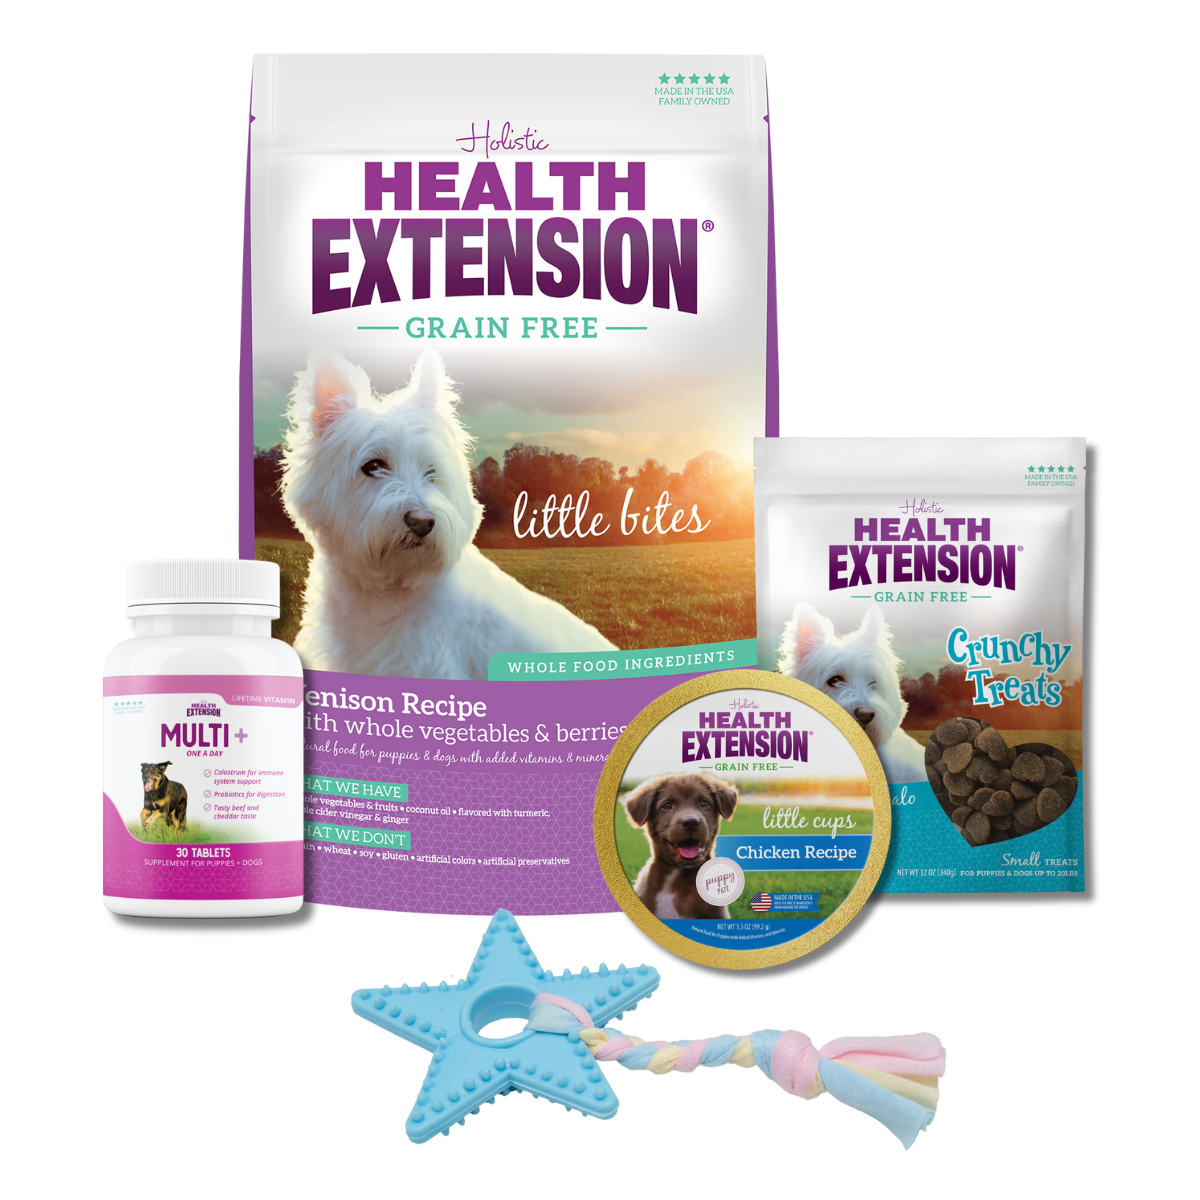 Complete Puppy Bundle: Bag of Health Extension Grain Free Venison Little Bites and variety of other dog products, including food, treats, toys, and supplements.